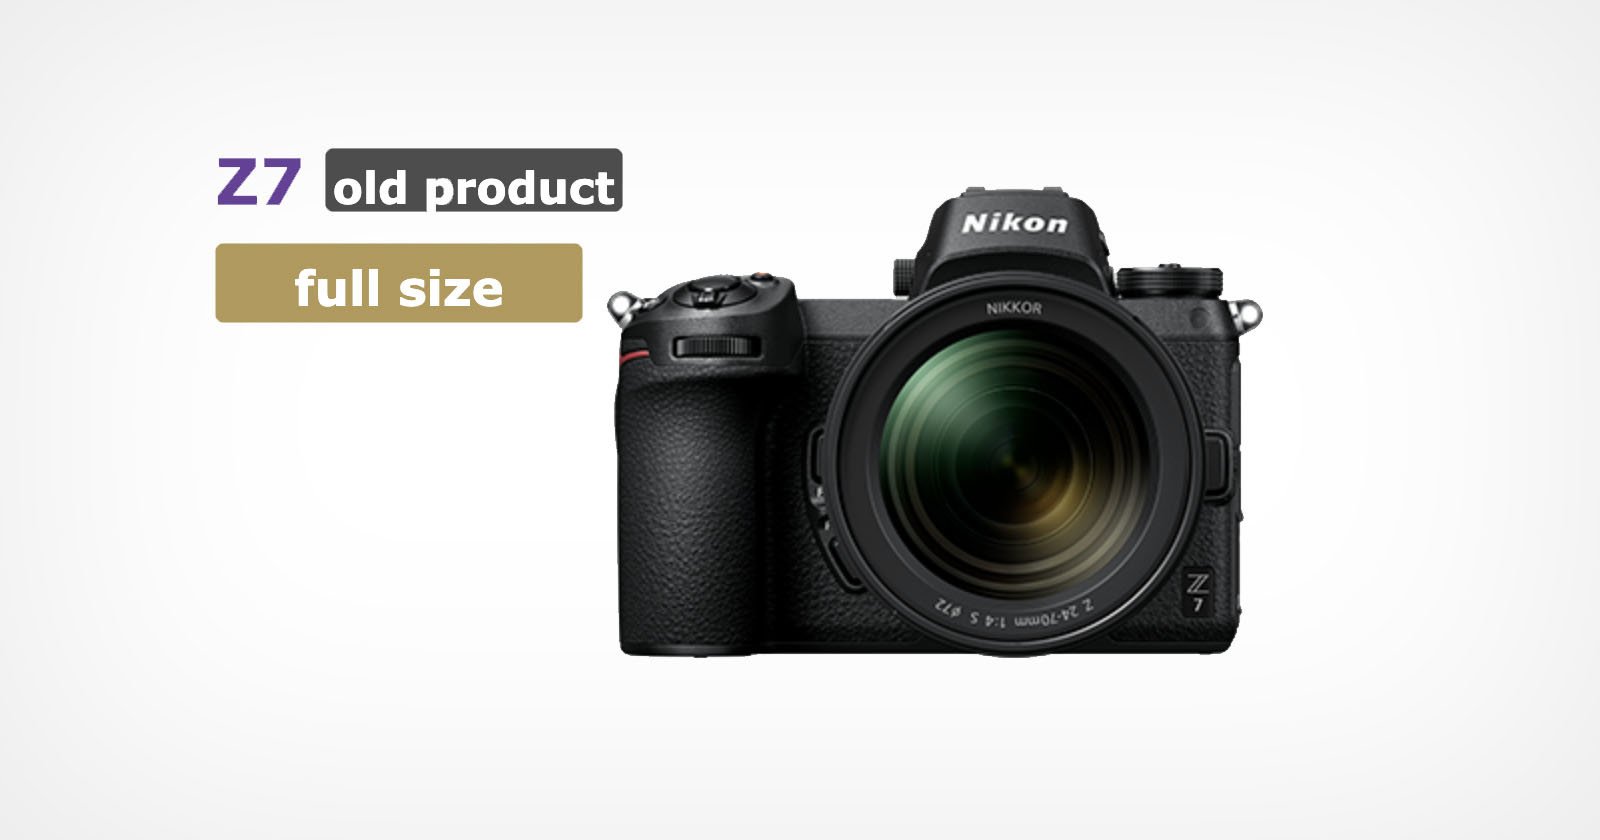  looks like nikon being discontinued 